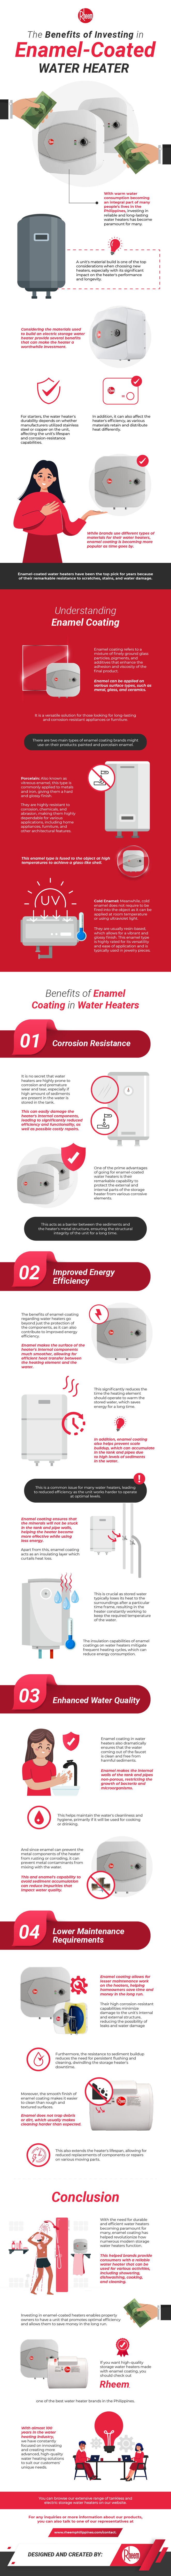 The_Benefits_of_Investing_in_Enamel-Coated_Water_Heaters-asdnaw(1)